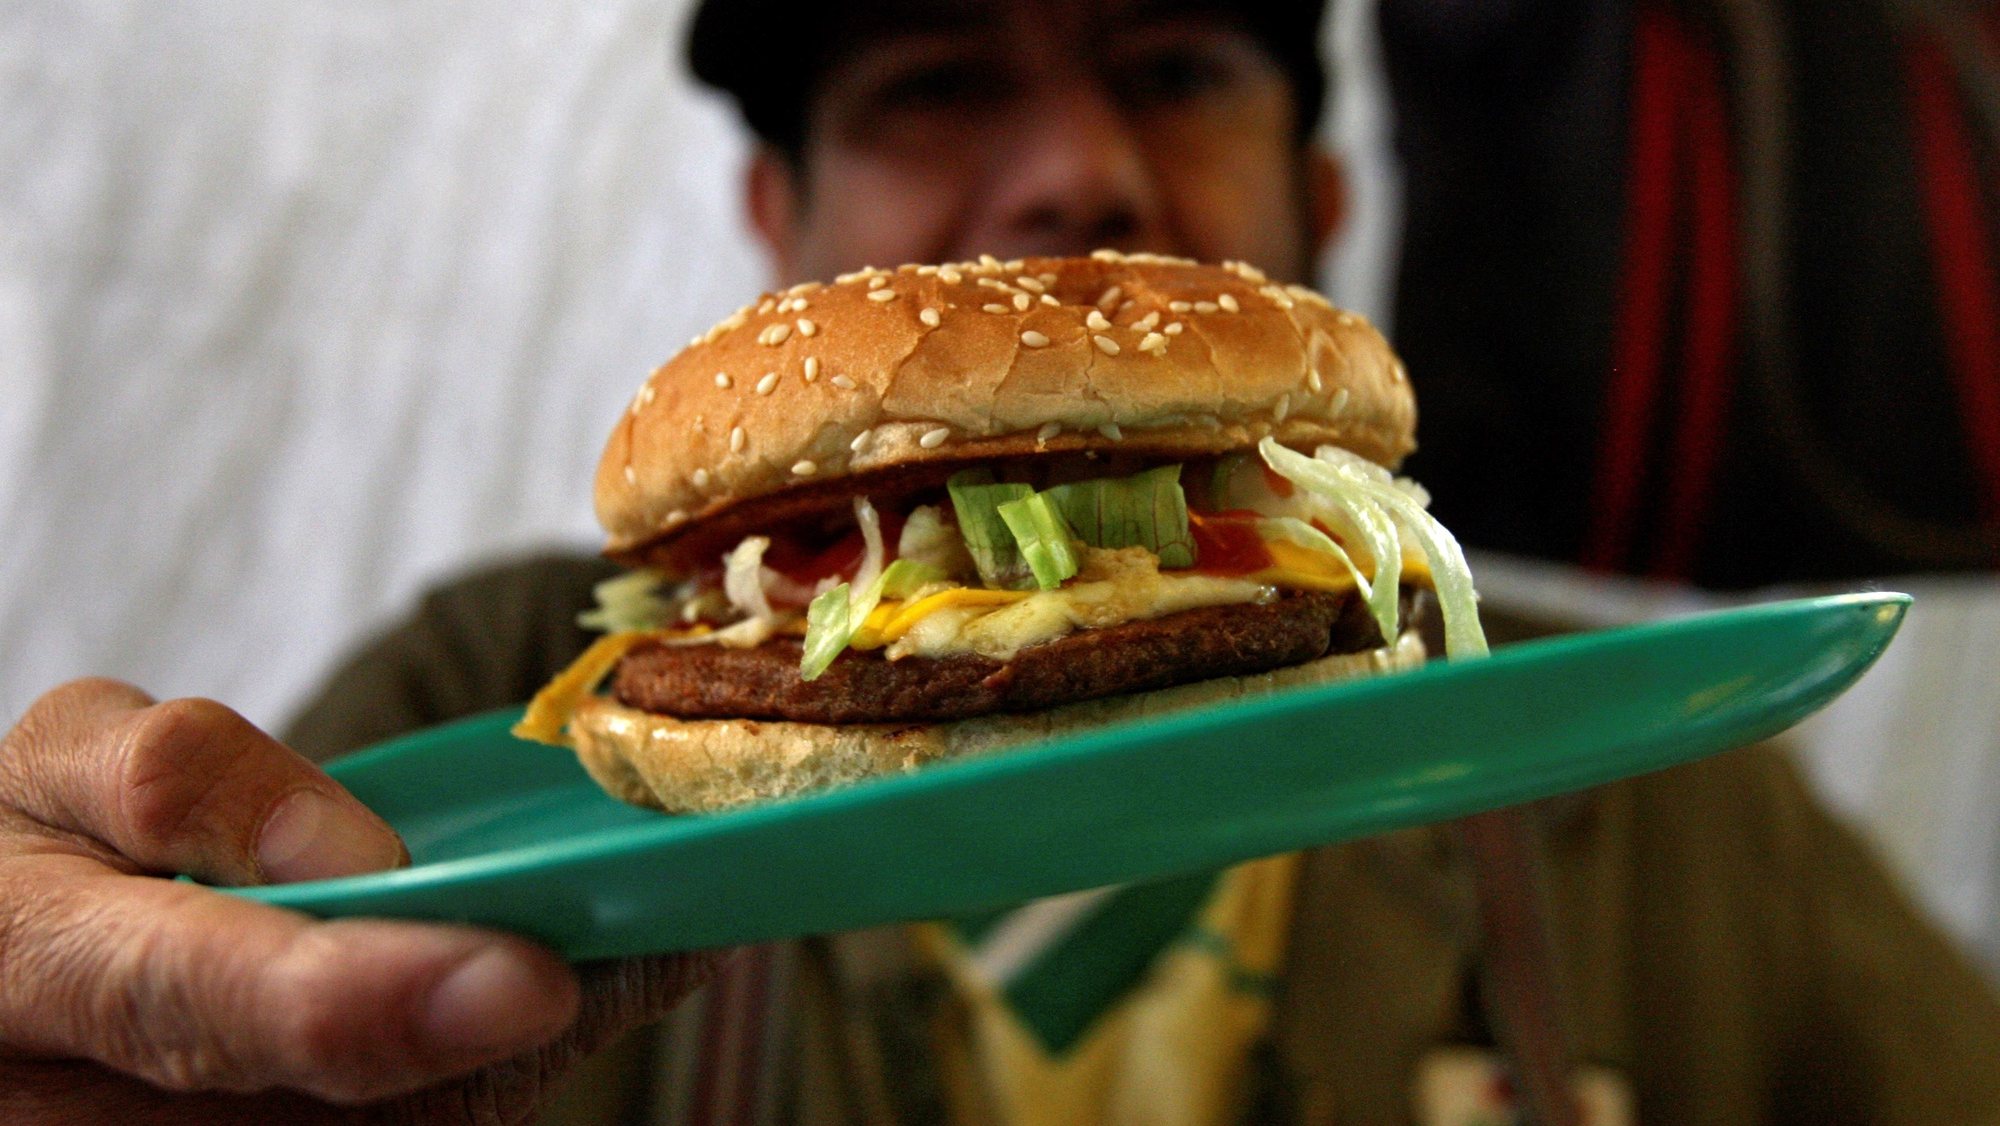 epa07924869 A Mexican man shows a cheeseburger in Mexico City, Mexico, 16 October 2019. According to the Food and Agriculture Organization (FAO), obesity affects almost 2,000 million people. In Latin America and the Caribbean have 105 million adults with obesity and 42 million starving representing a global tendency; there is more obese than people starving. Junk food is the clue for these figures. Non-processed food such as vegetables, meat, fish or cereals are more expensive than ultra-processed food, not only in the First World but also in the Third World. EFE/ Mario Guzman  EPA/Mario Guzman